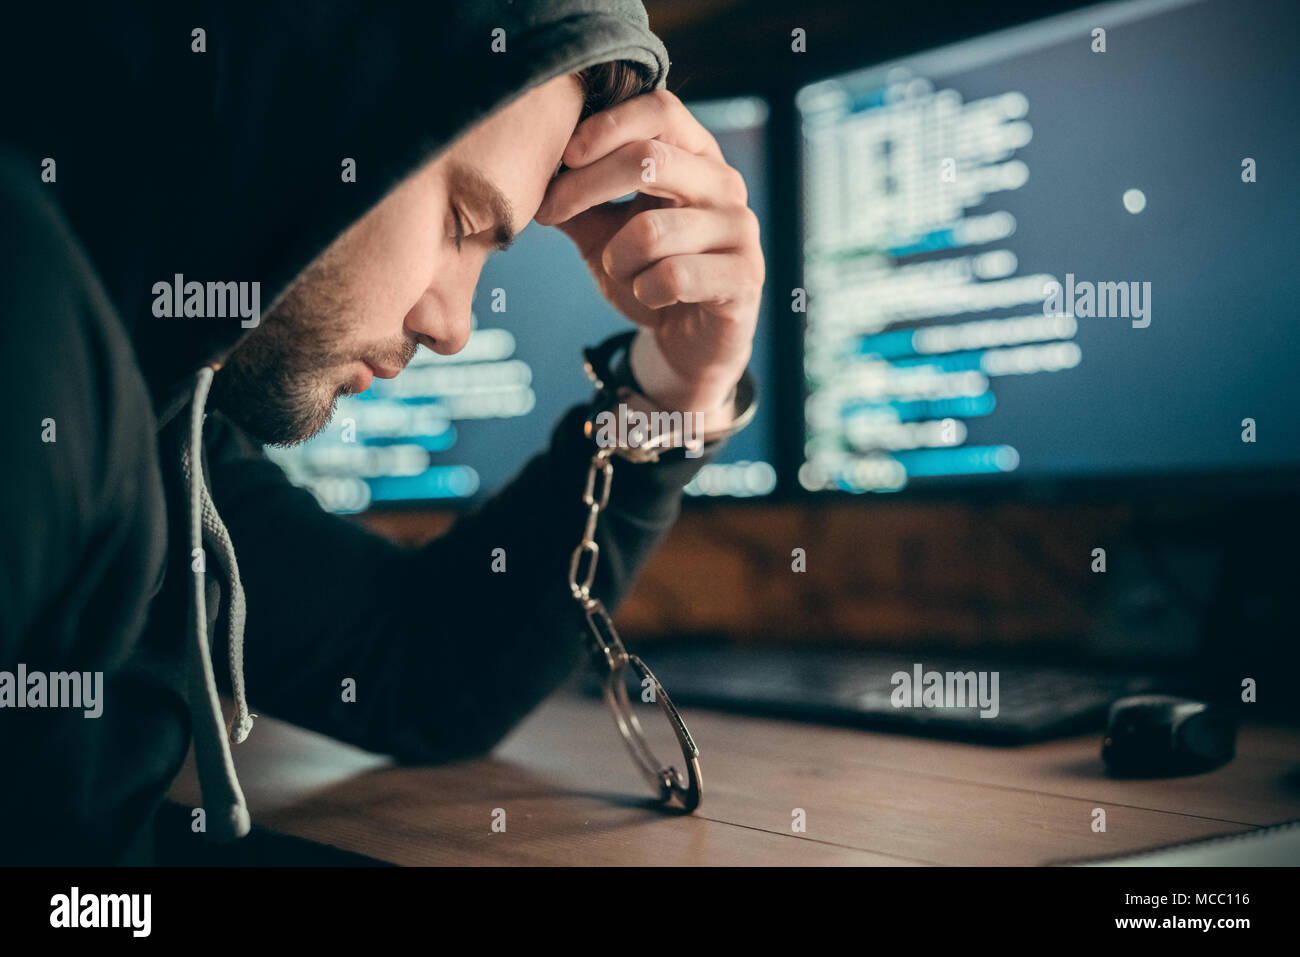 Arrested upset hacker or sad internet criminal got caught to be imprisoned sitting with hand in handcuffs on computer code background, cyber crime law Stock Photo